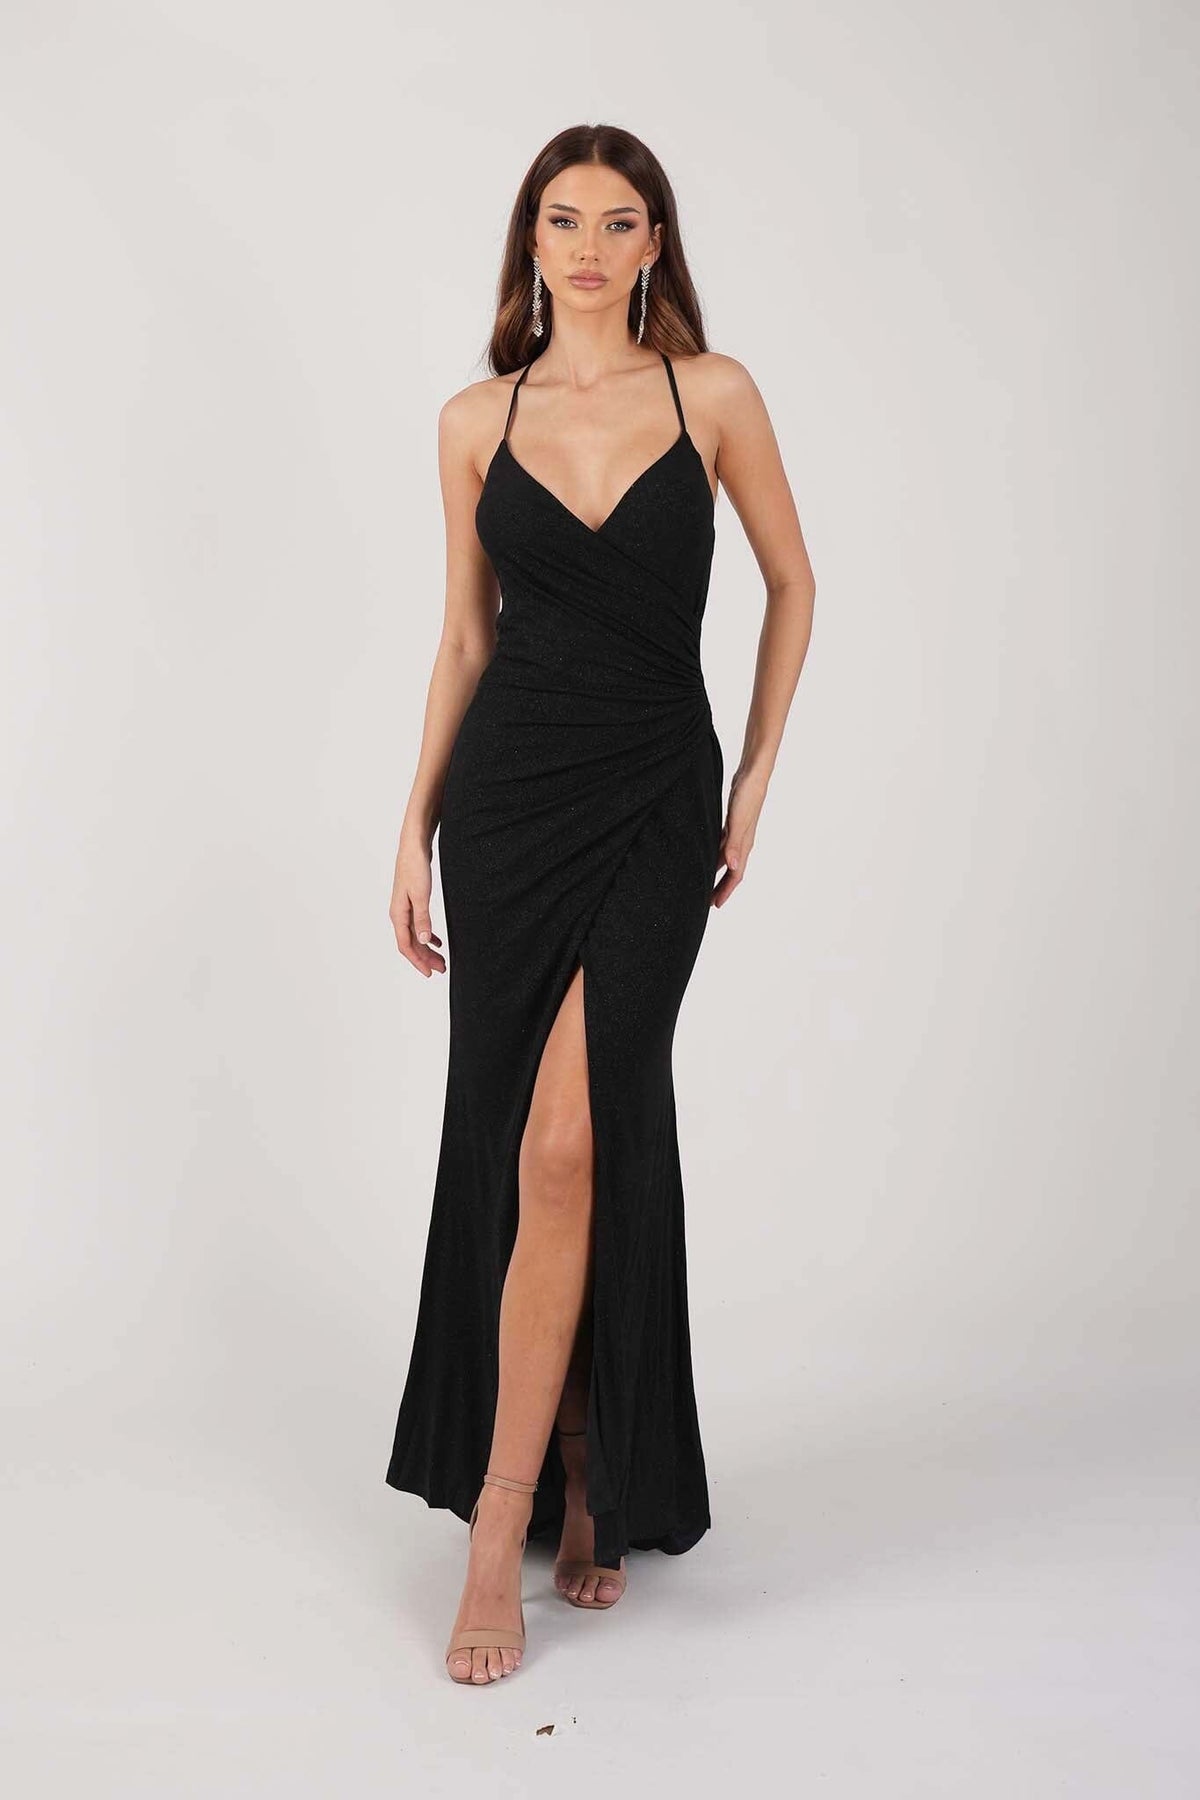 Black Shimmer Fitted Maxi Dress with Thin Shoulder Straps, Gathered Detail at Waist and Leg Slit